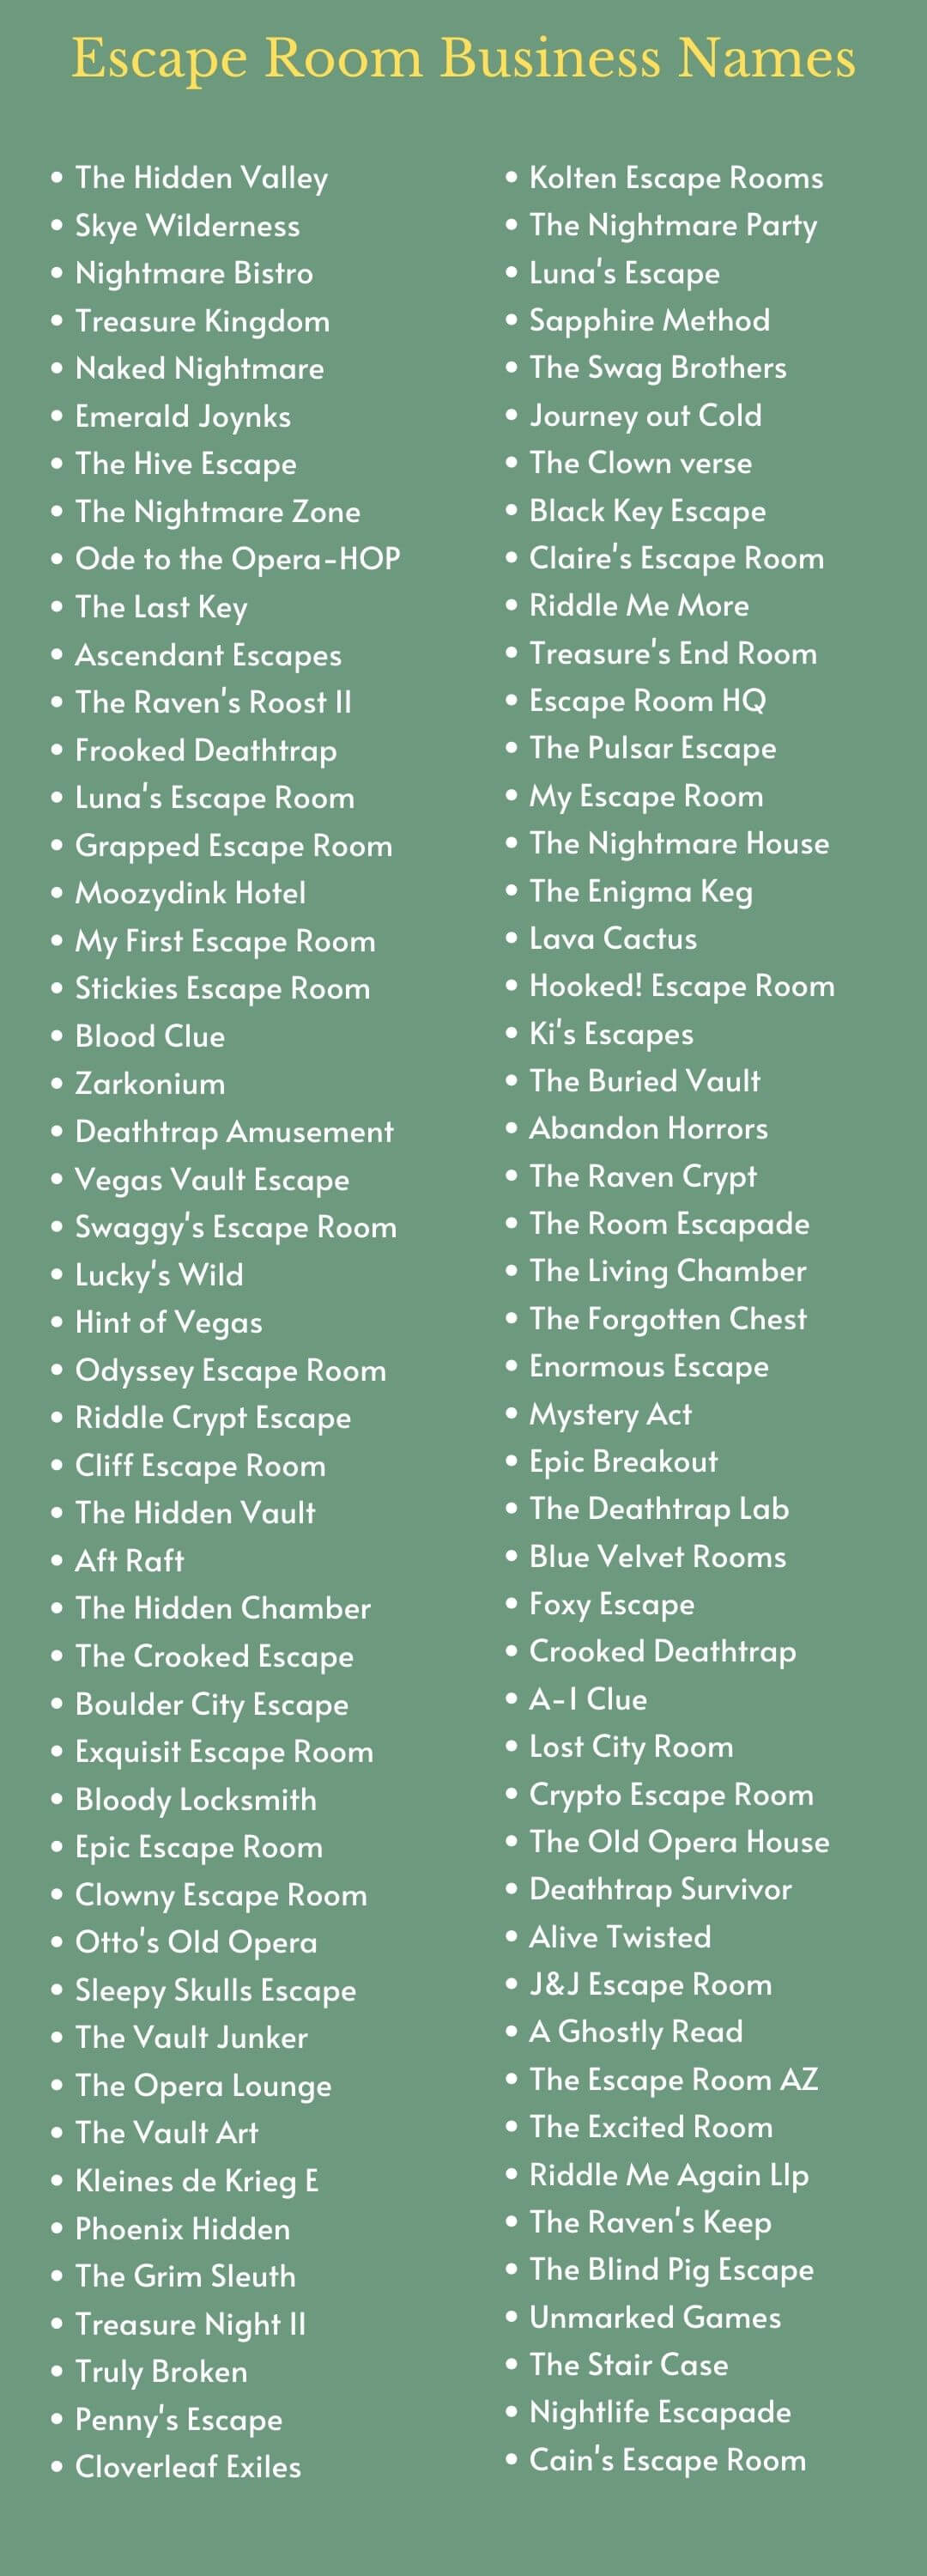 Escape Room Business Names: Infographic